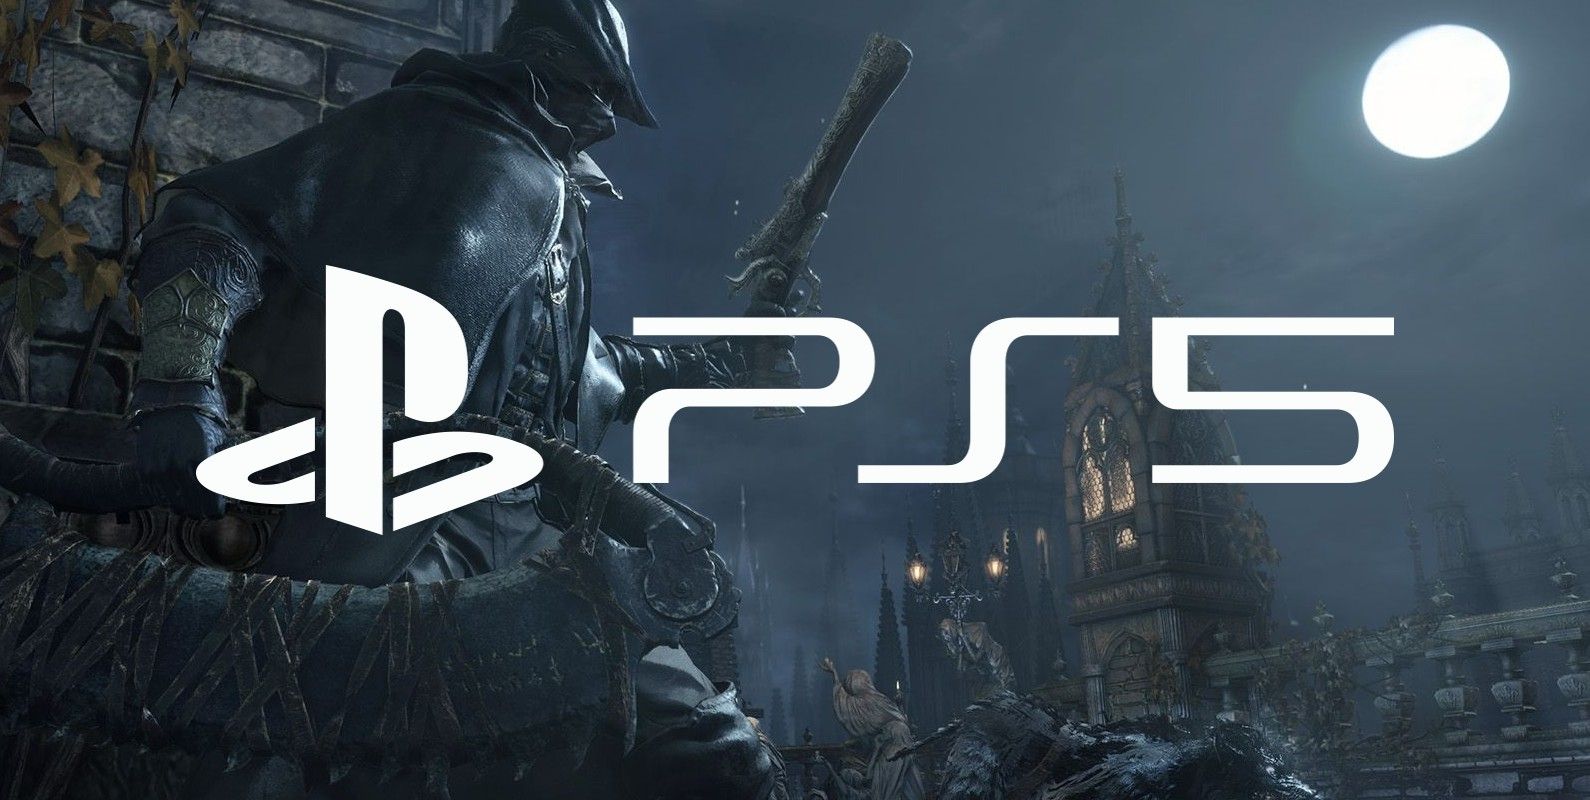 Bloodborne is getting a remaster - rumored details about rumored PC and PS5  ports 